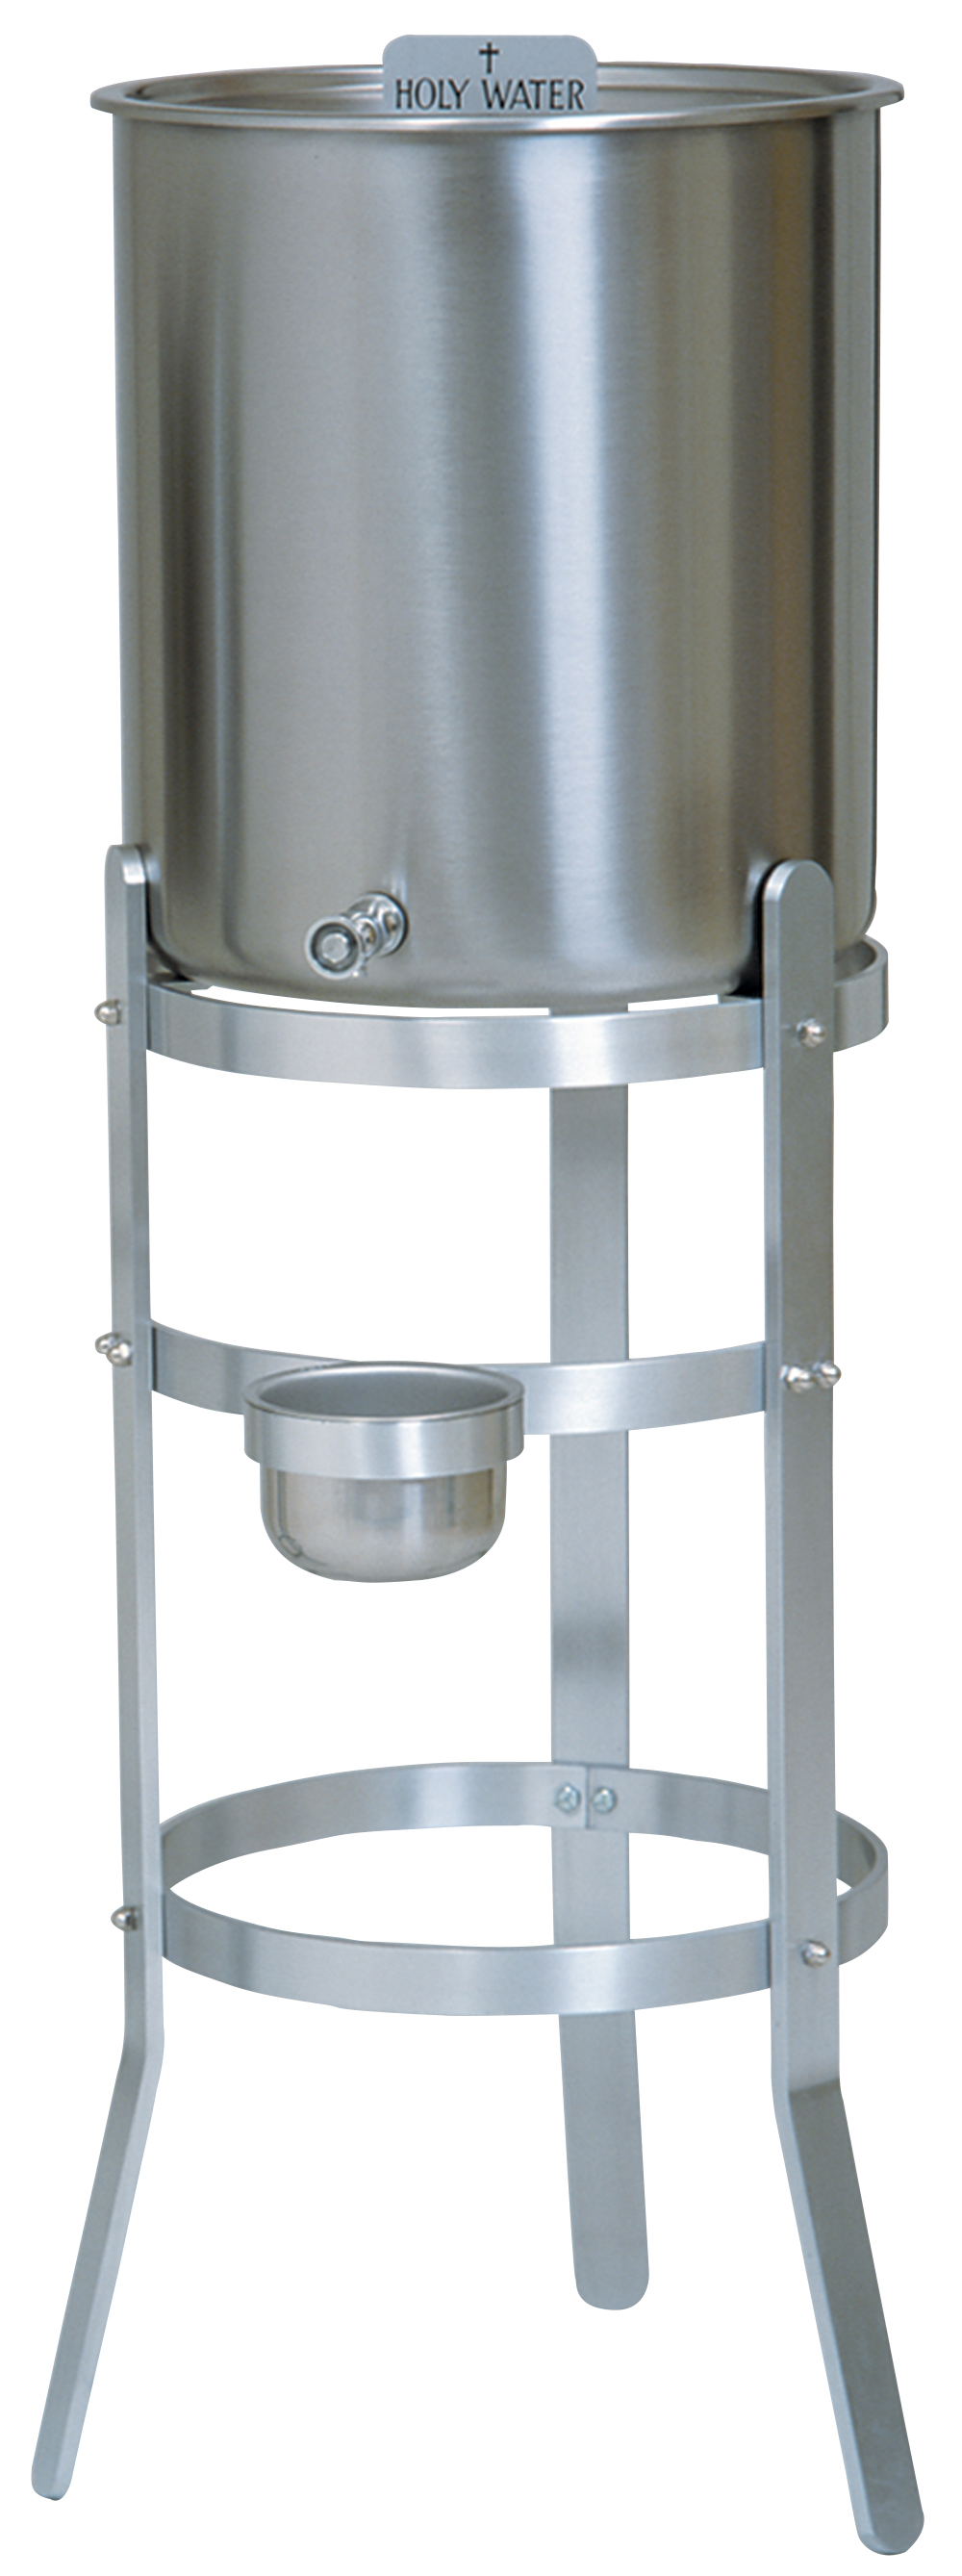 K181-15H Holy Water Tank and Stand